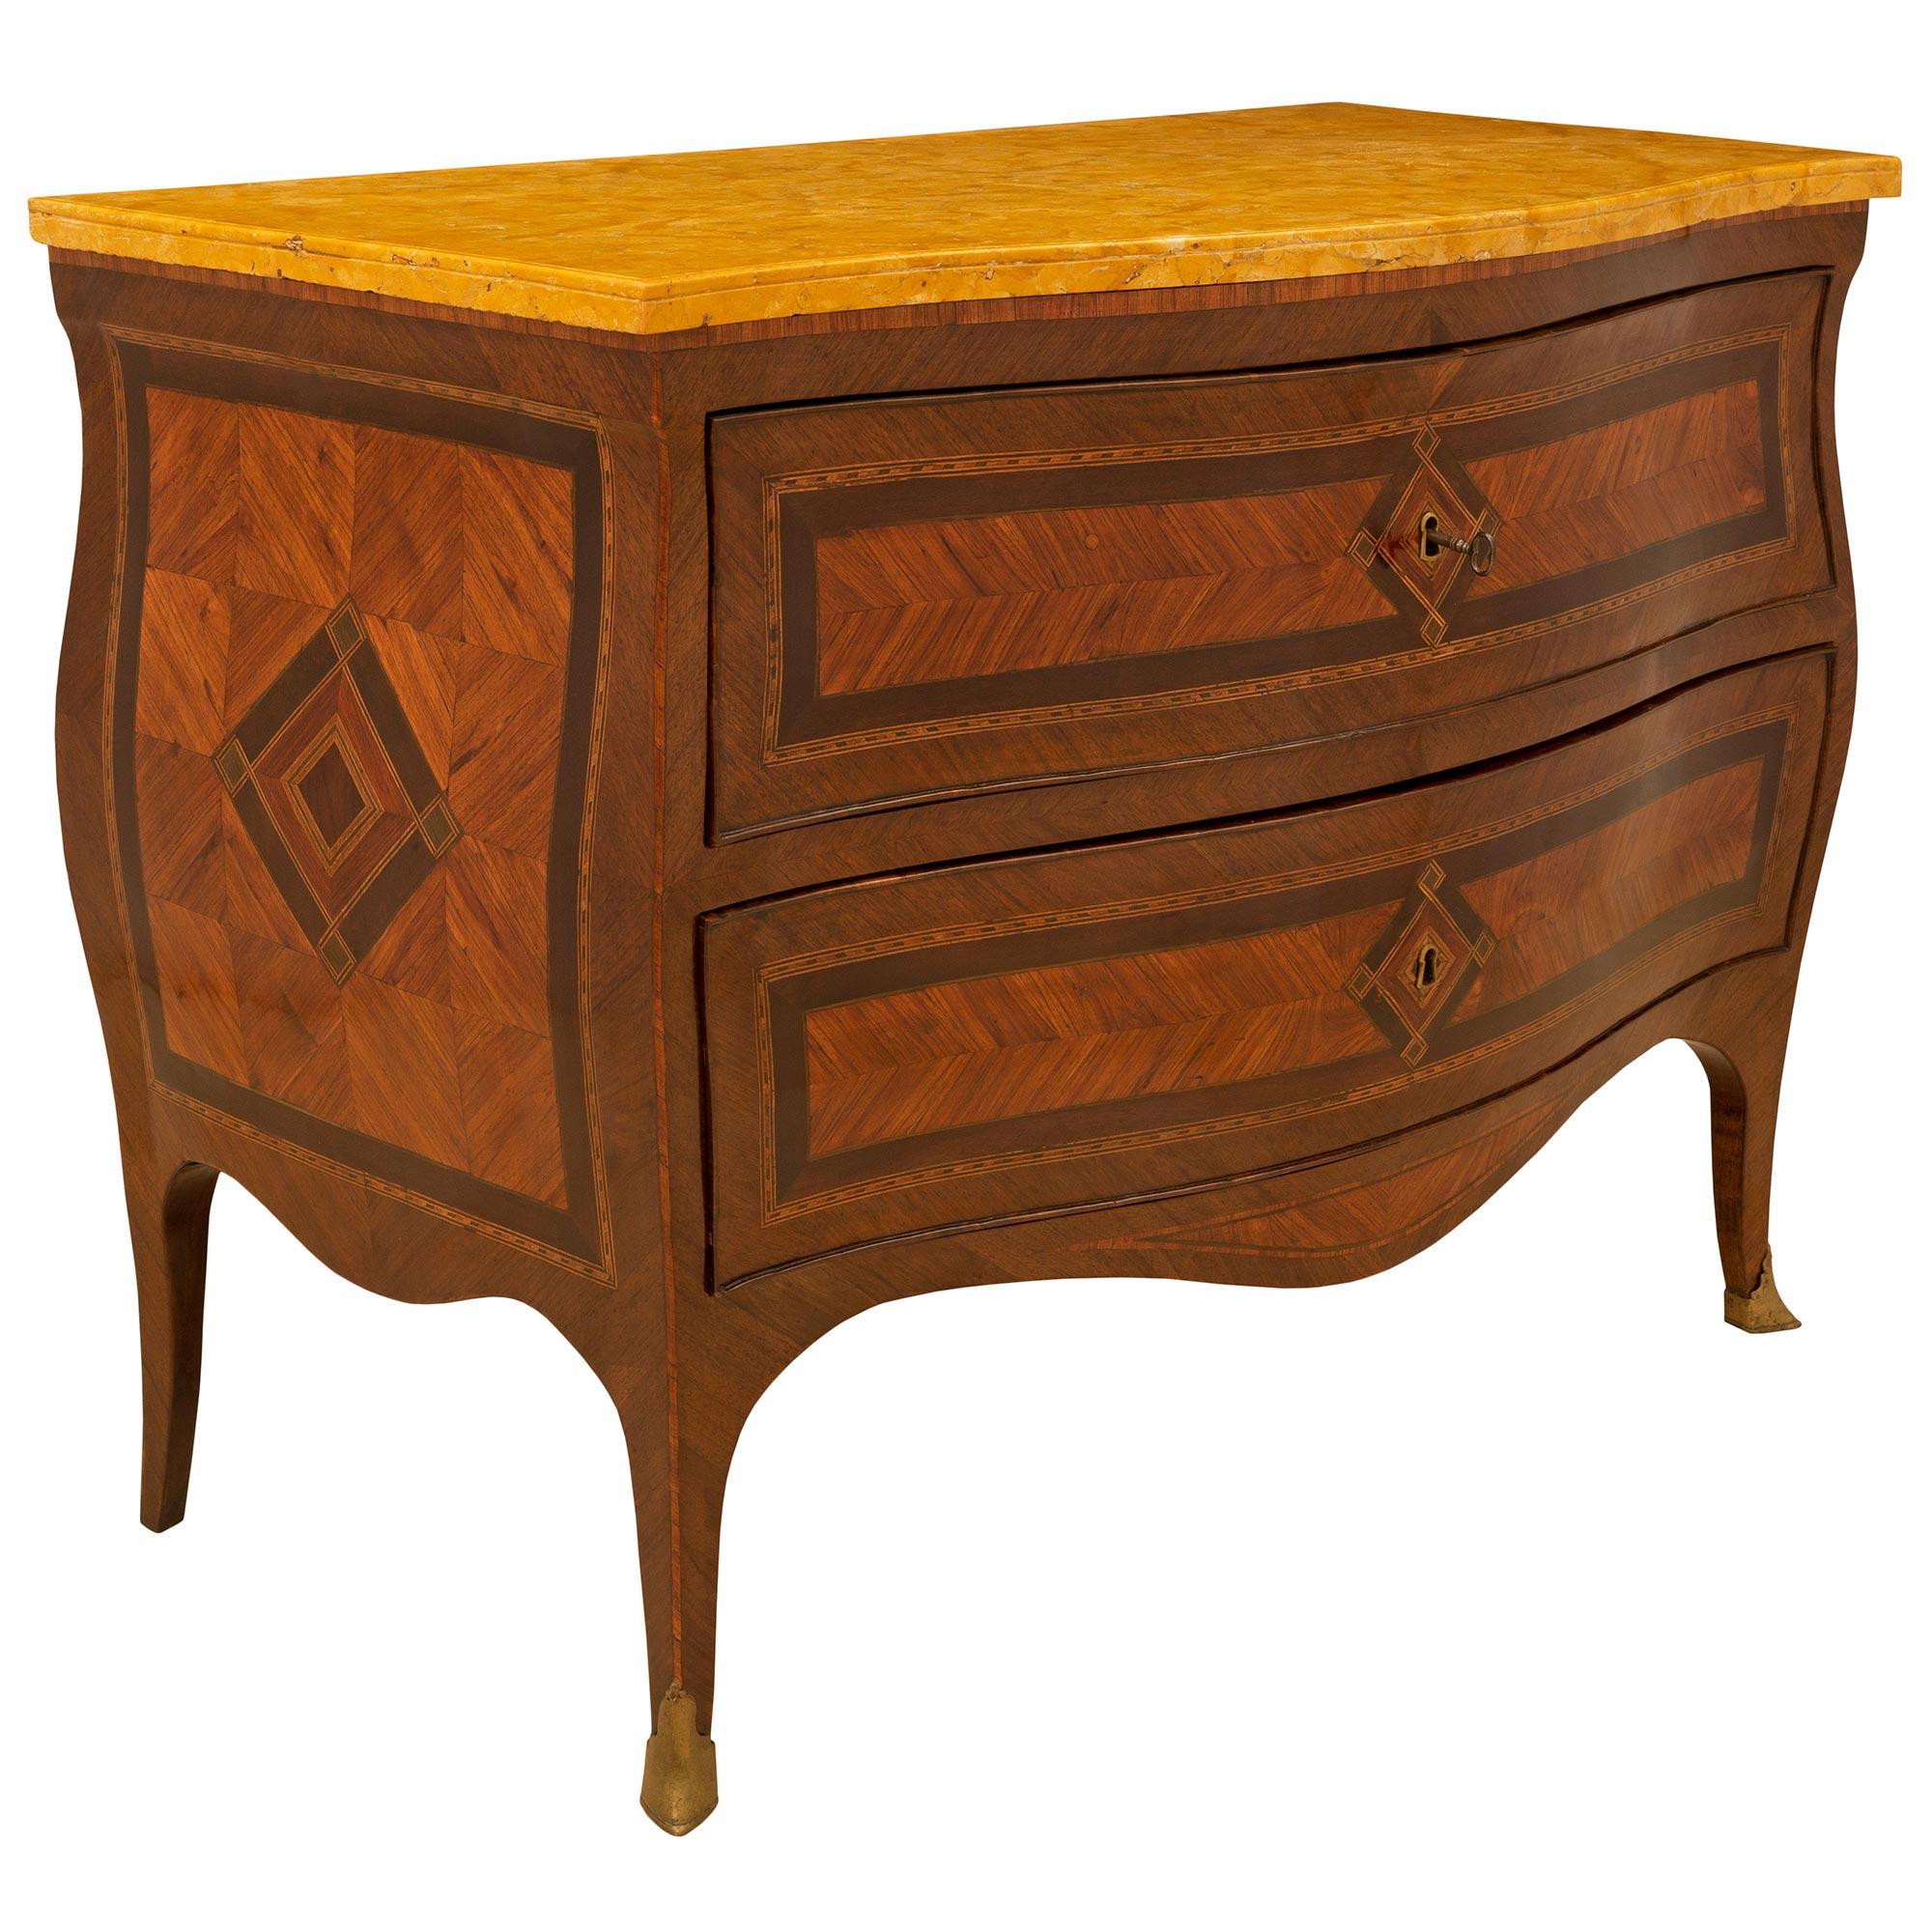 Italian 18th Century Louis XV Period Tulipwood and Kingwood Bombe Commodes In Good Condition For Sale In West Palm Beach, FL